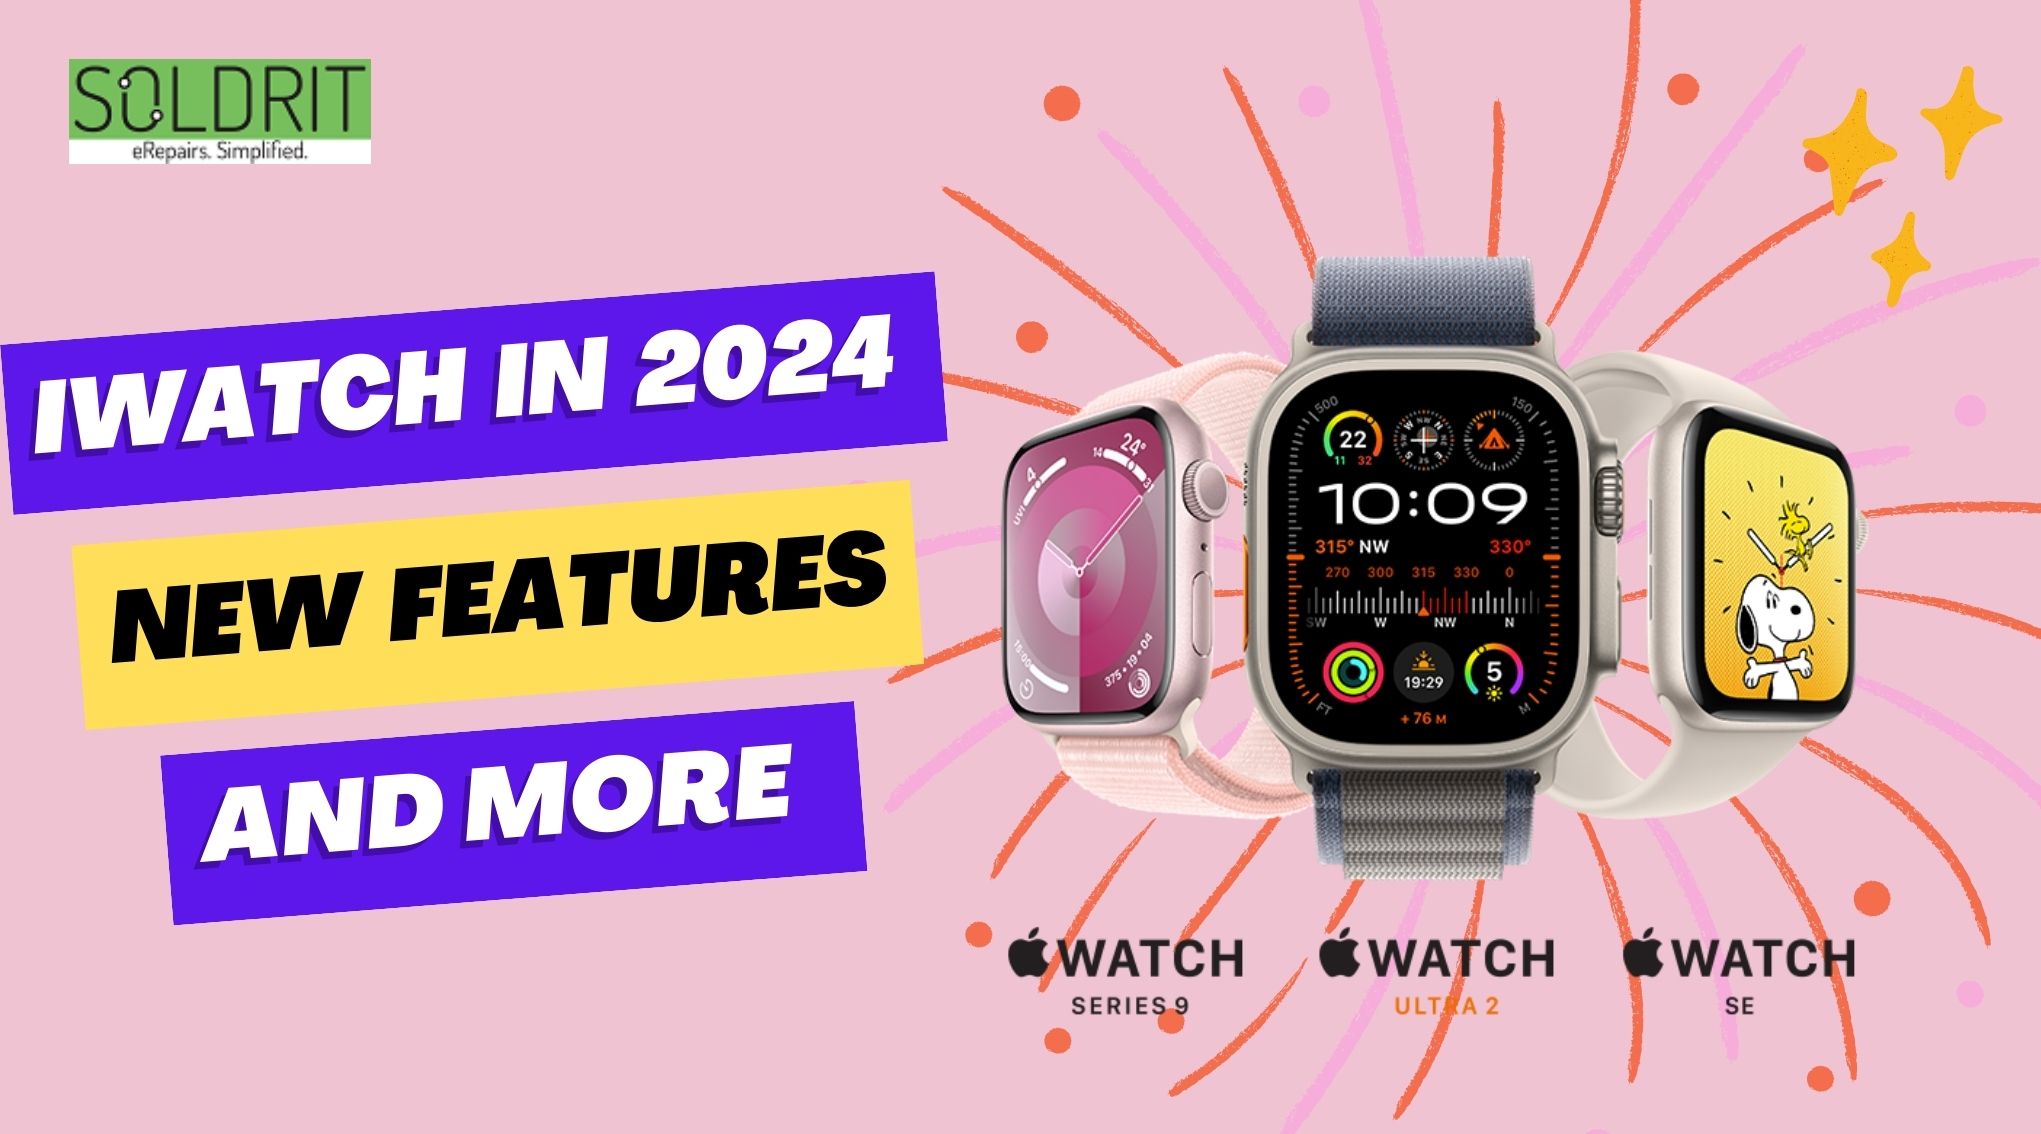 iWatch in 2024 New Features and More